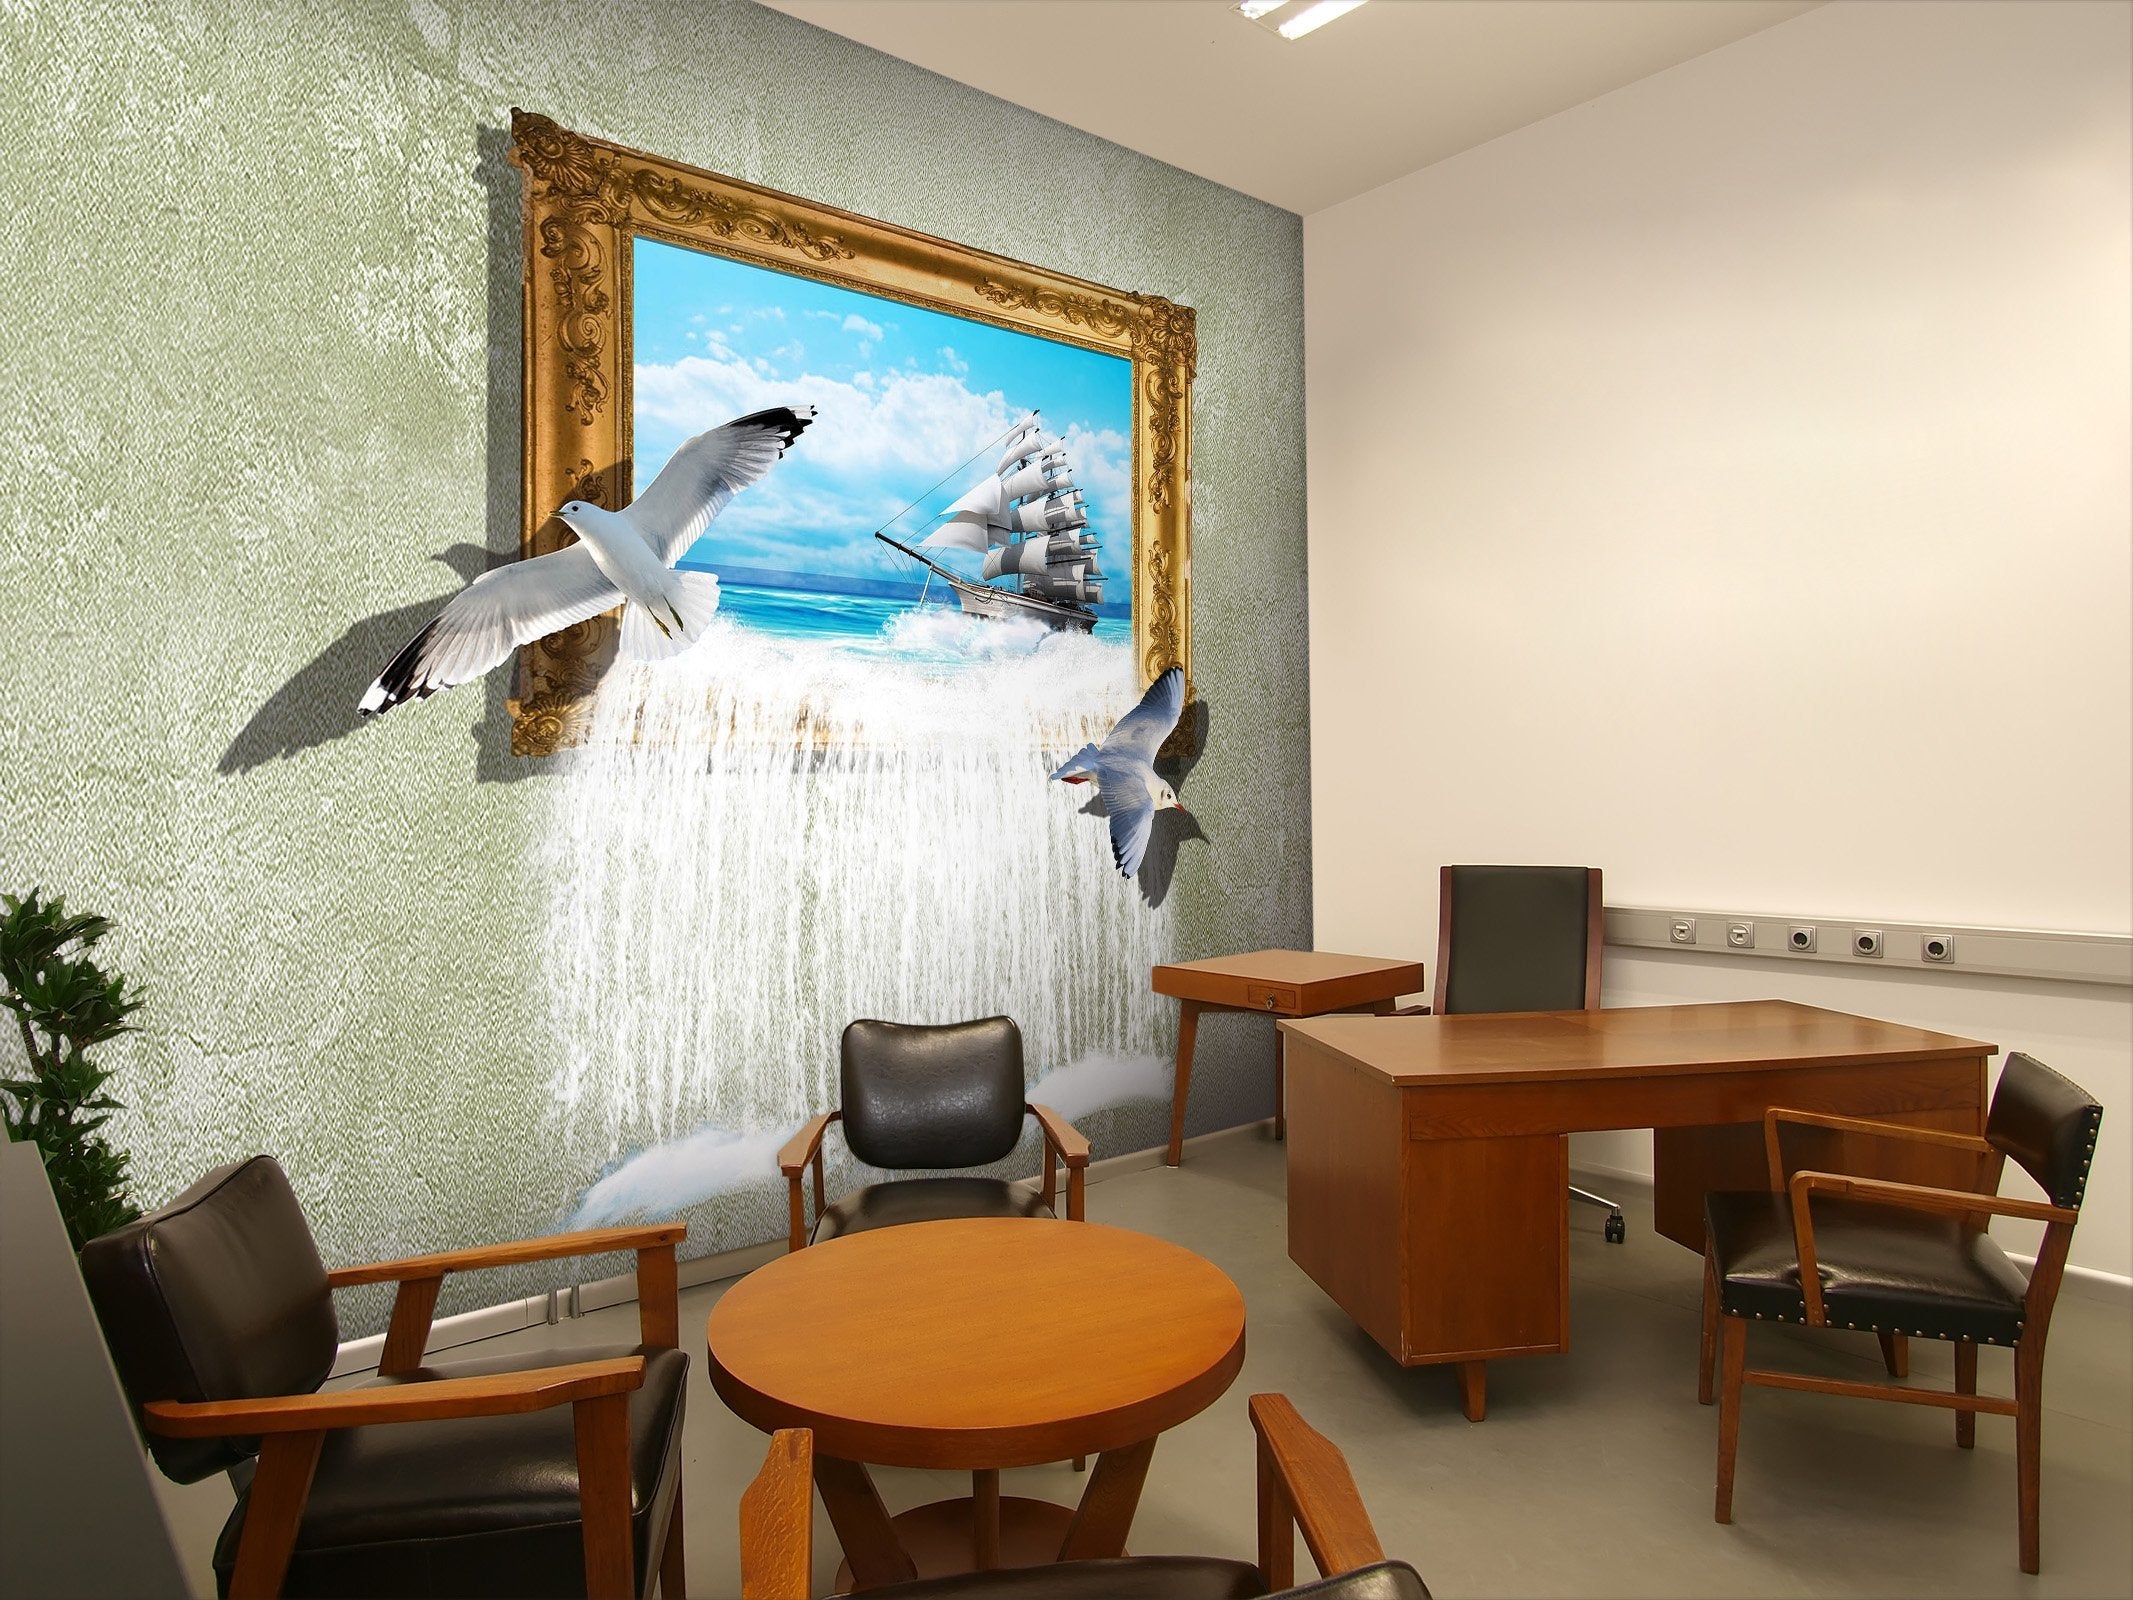 3D oil painting with seagulls and ship 20 Wall Murals Wallpaper AJ Wallpaper 